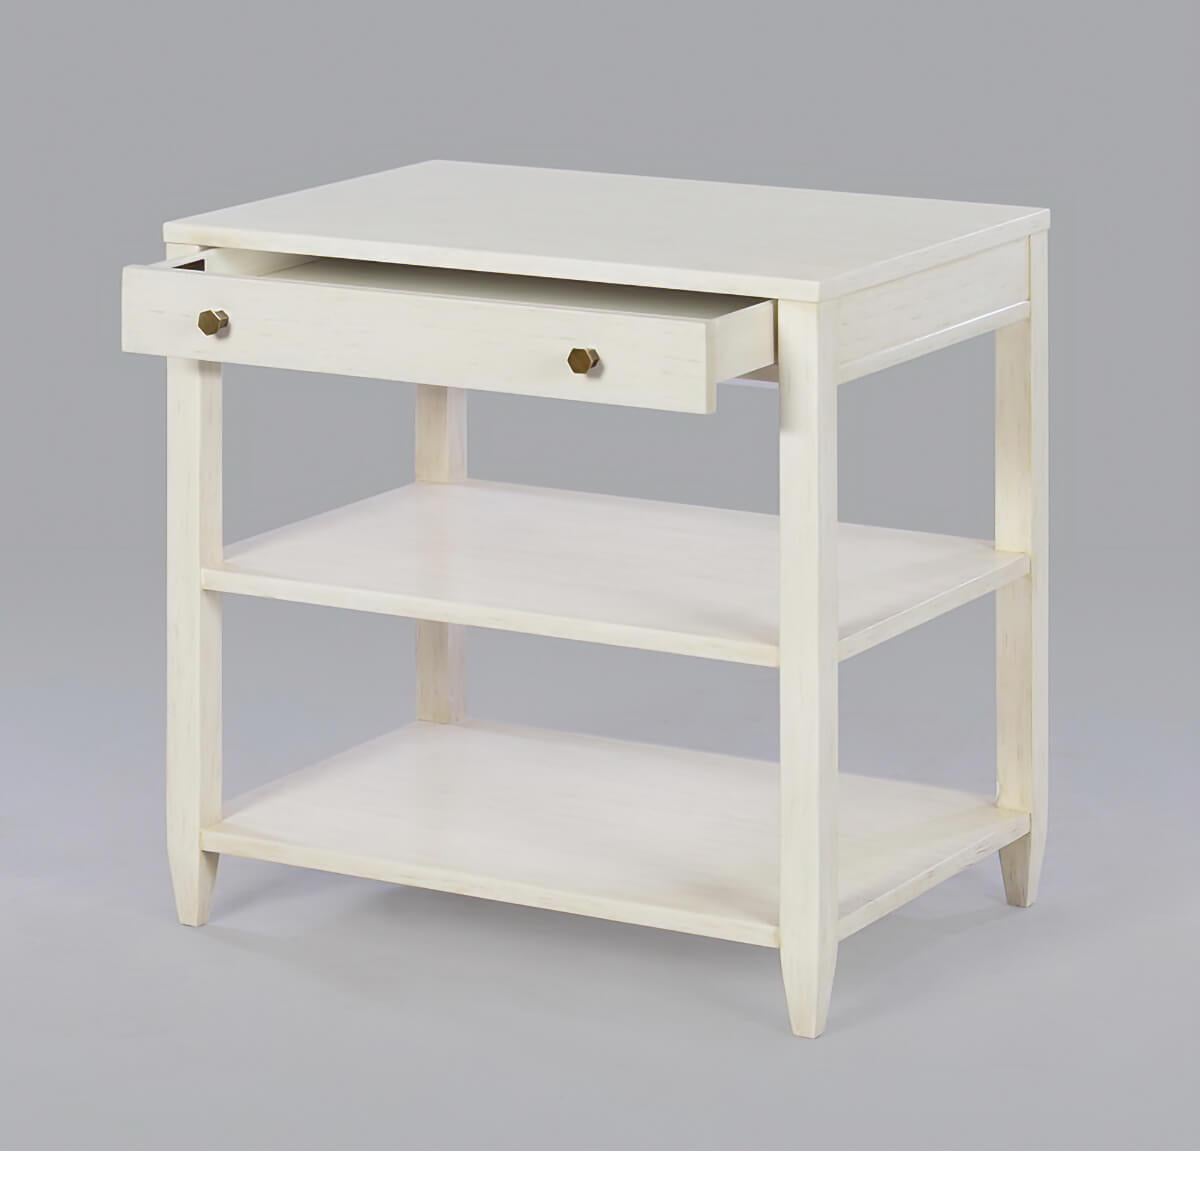 Classic wide rectangle side table with a drawer, two shelves, brass hardware, and tapered feet, has a rustic “drift” white painted finish with subtle grey distressing with subtle visual distressing and a hand-rubbed finish.

Dimensions: 26